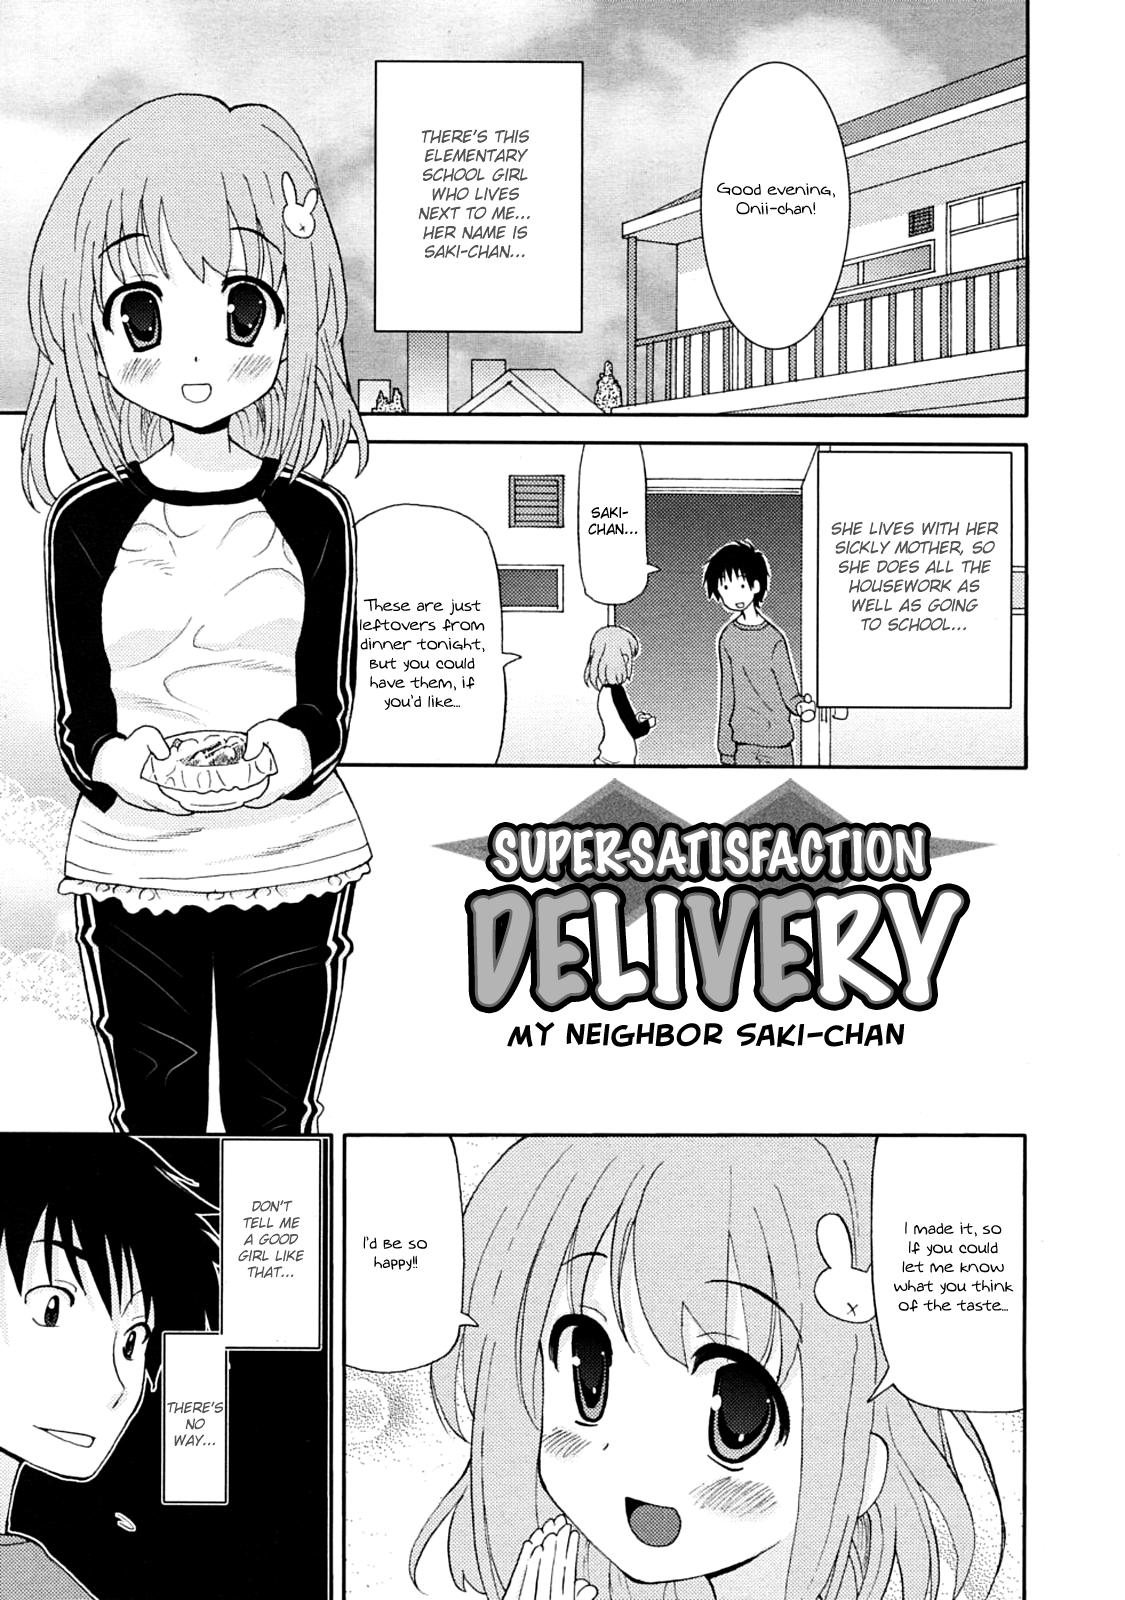 Outside [Homing] Super Satisfaction Delivery #6 -My Neighbor Saki-chan- [ENG] (Hayama_Kotono) Pussy To Mouth - Picture 1